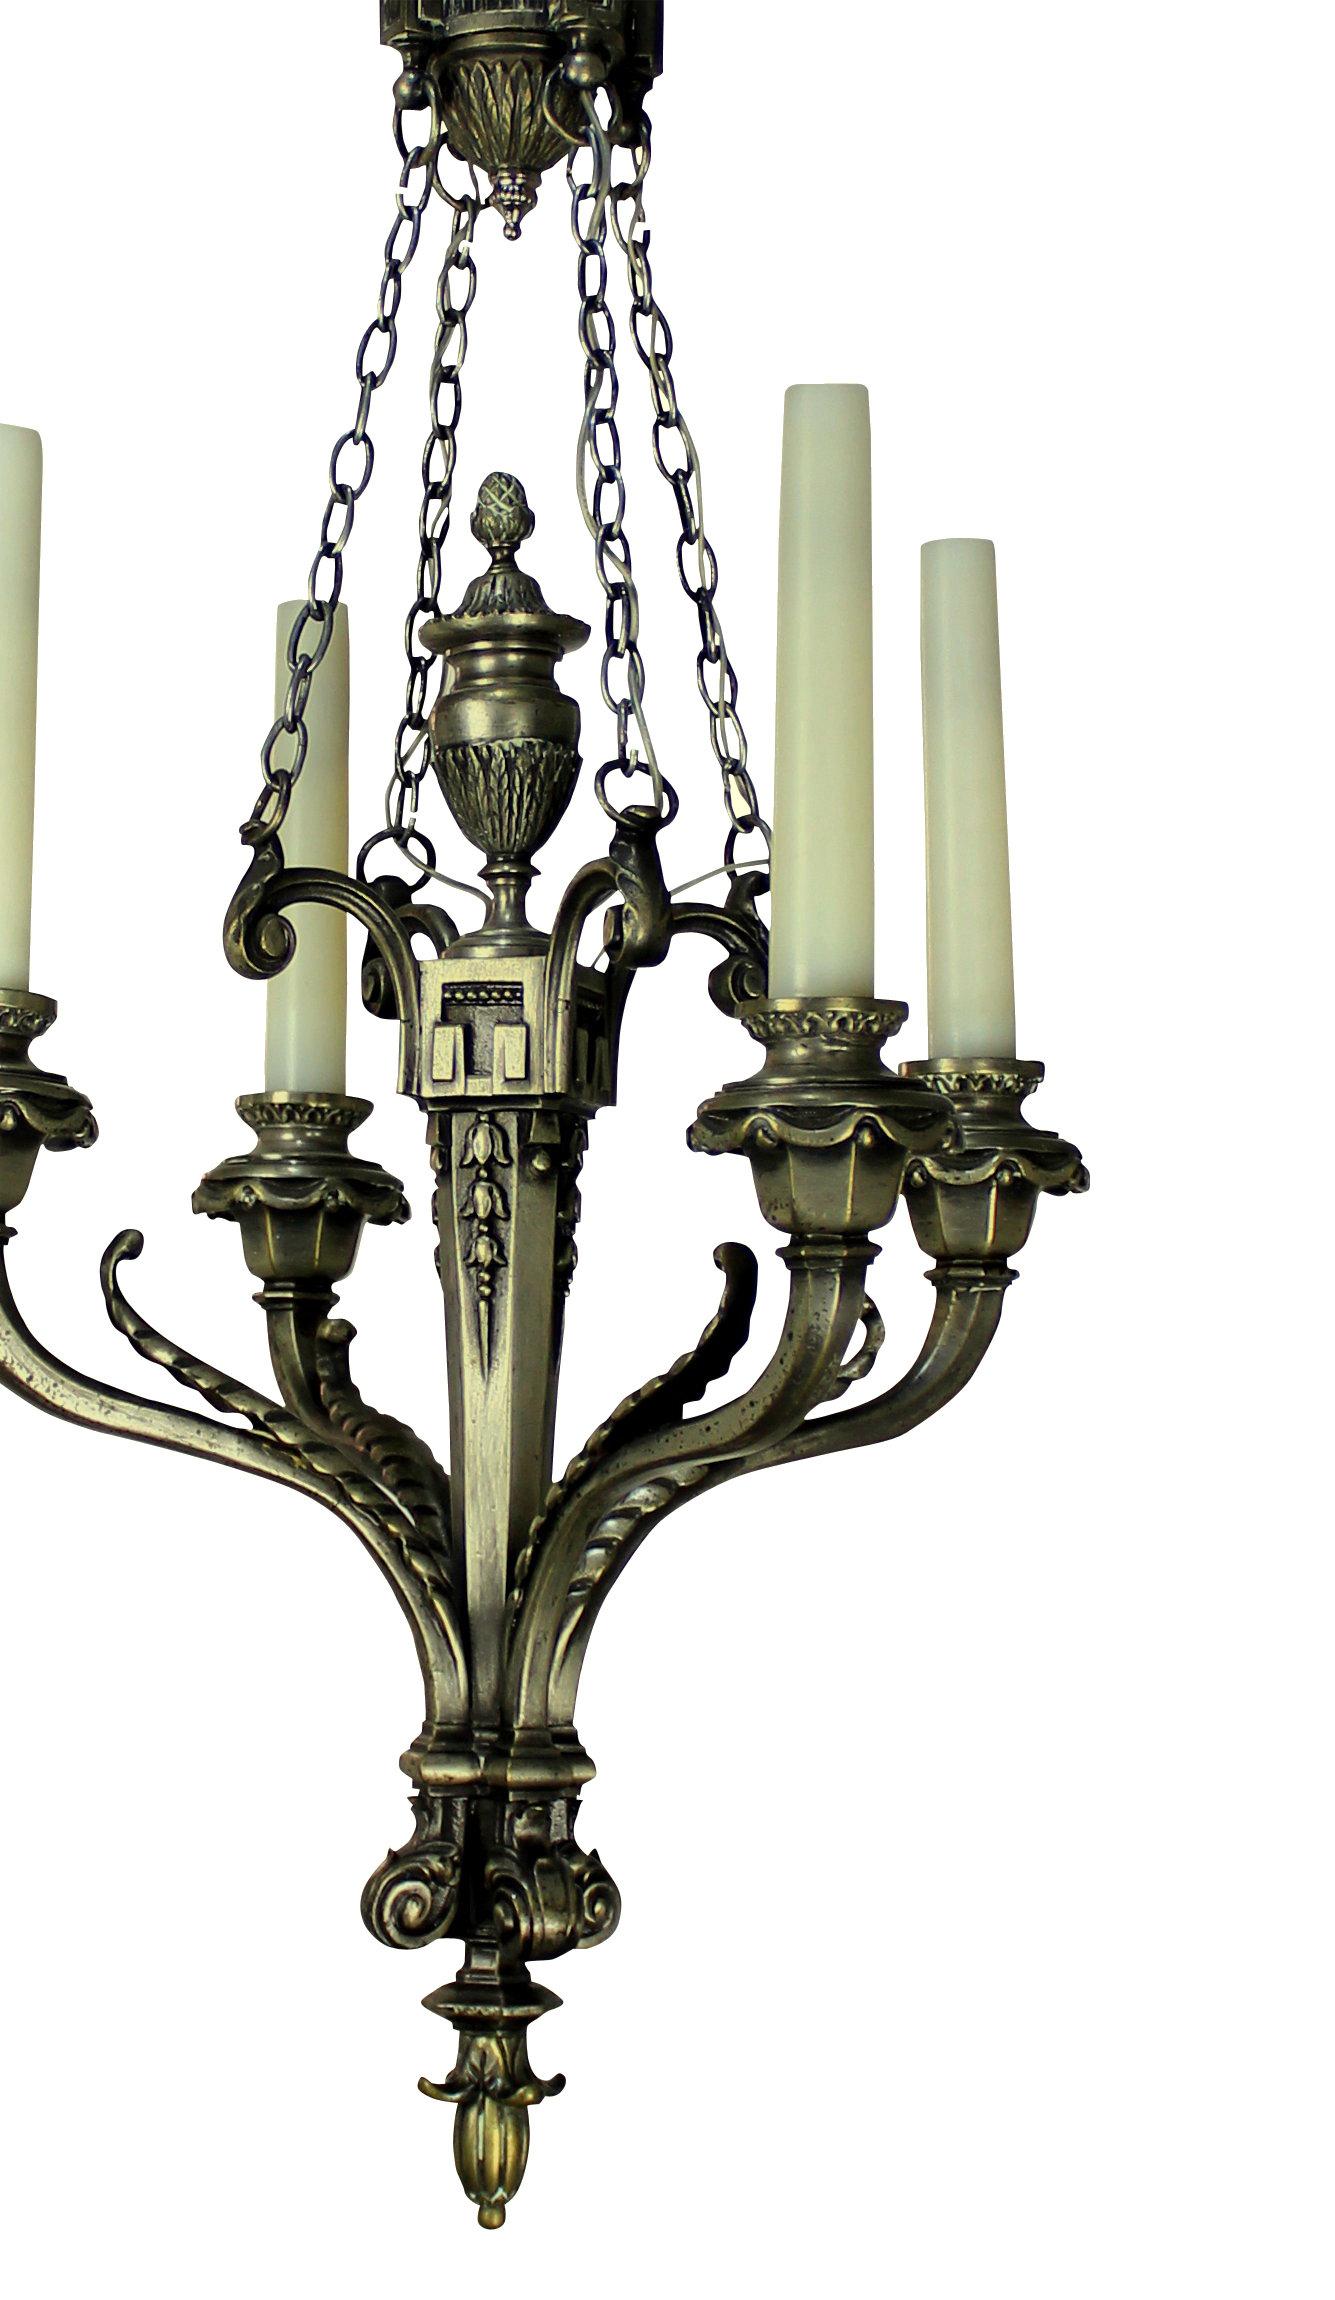 A French silver plated bronze four-branch chandelier in a neoclassical style.